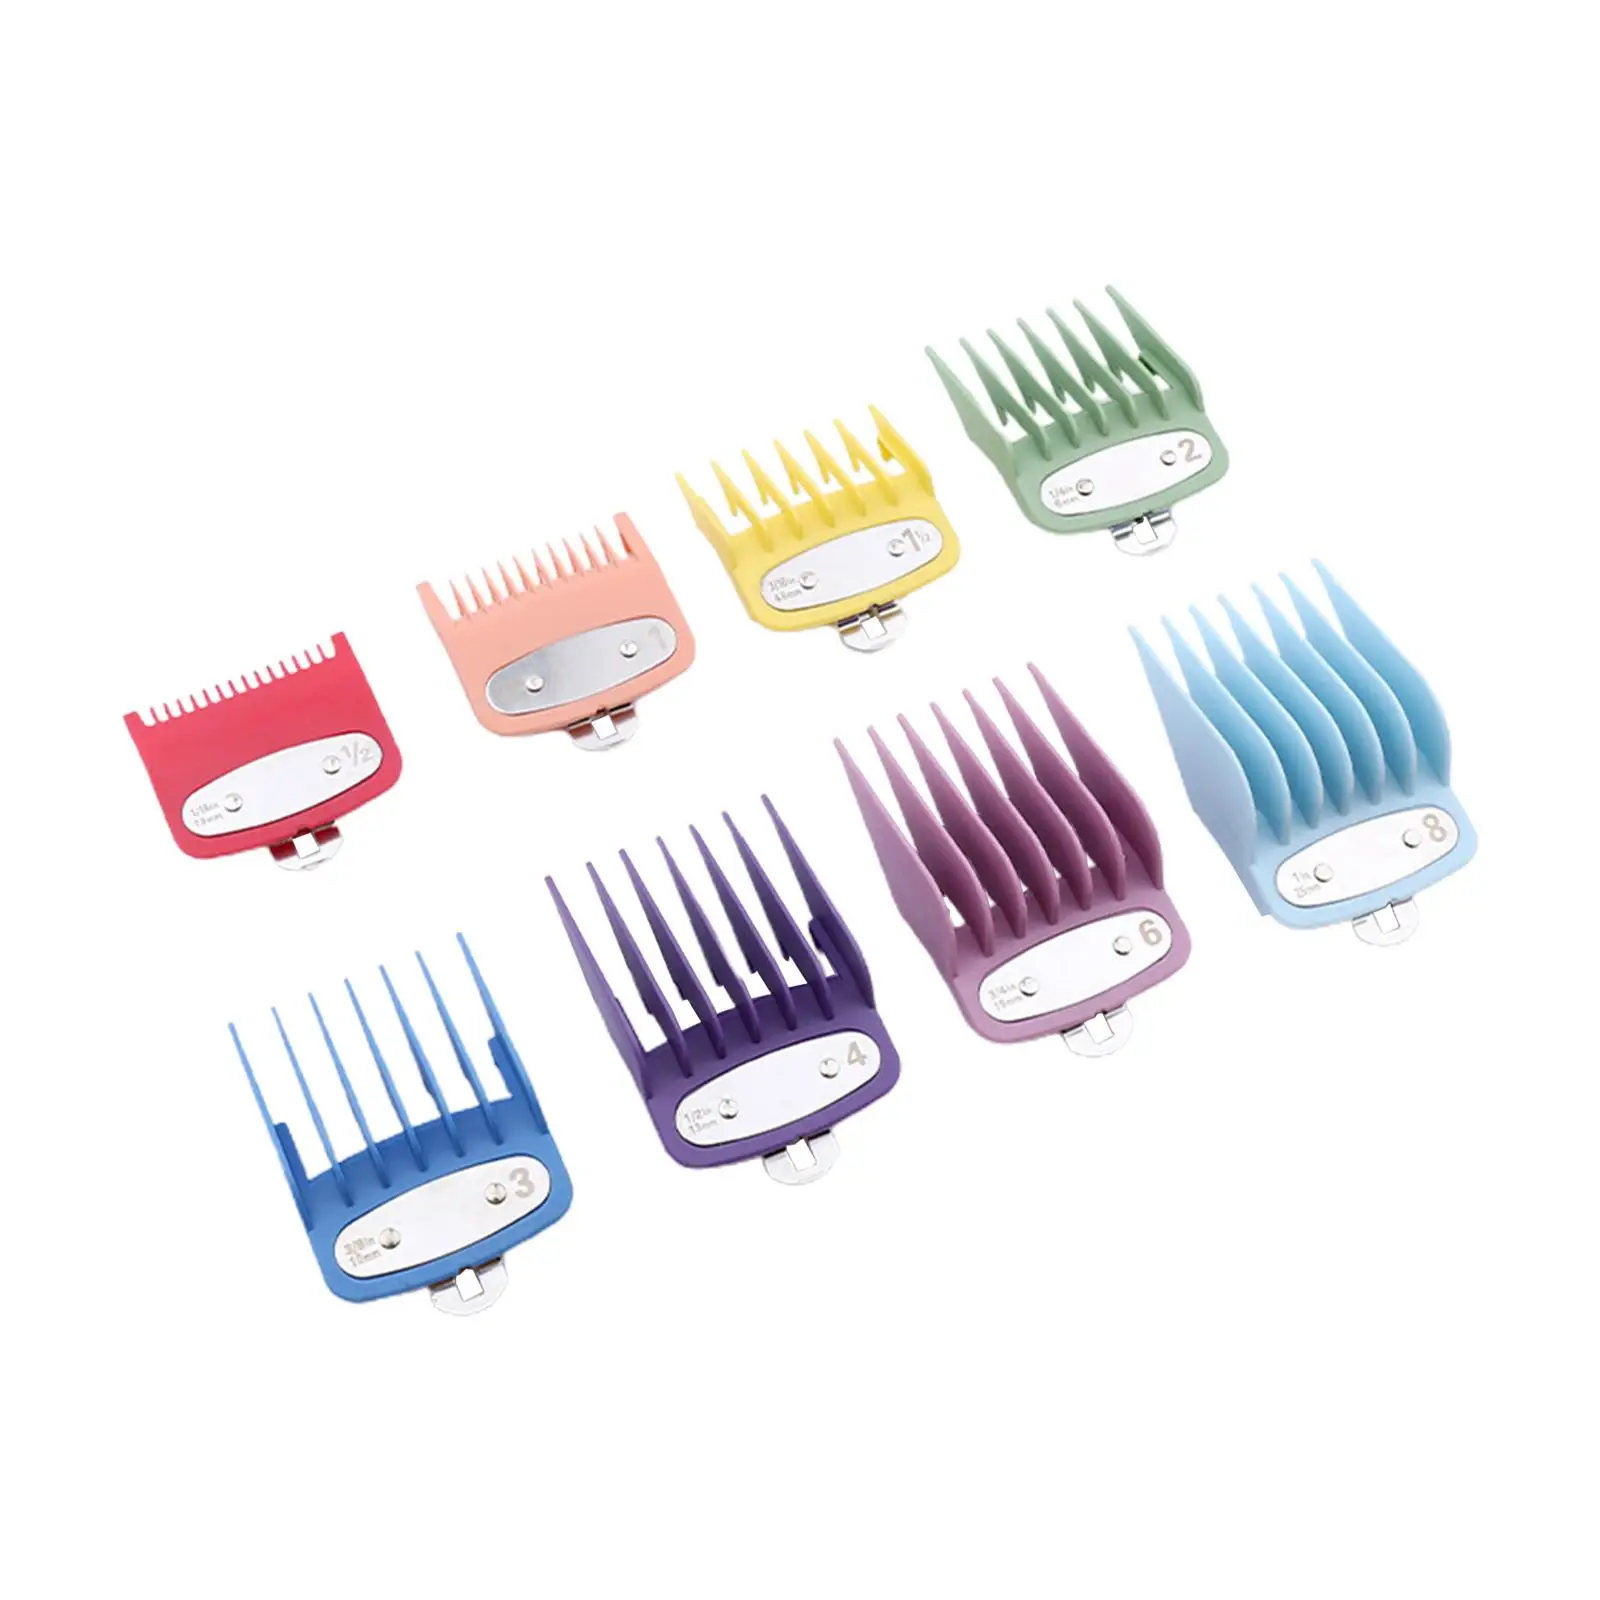 8 Pieces Hair Clipper Guards from 1/16 inch to 1inch for Wahl Clippers